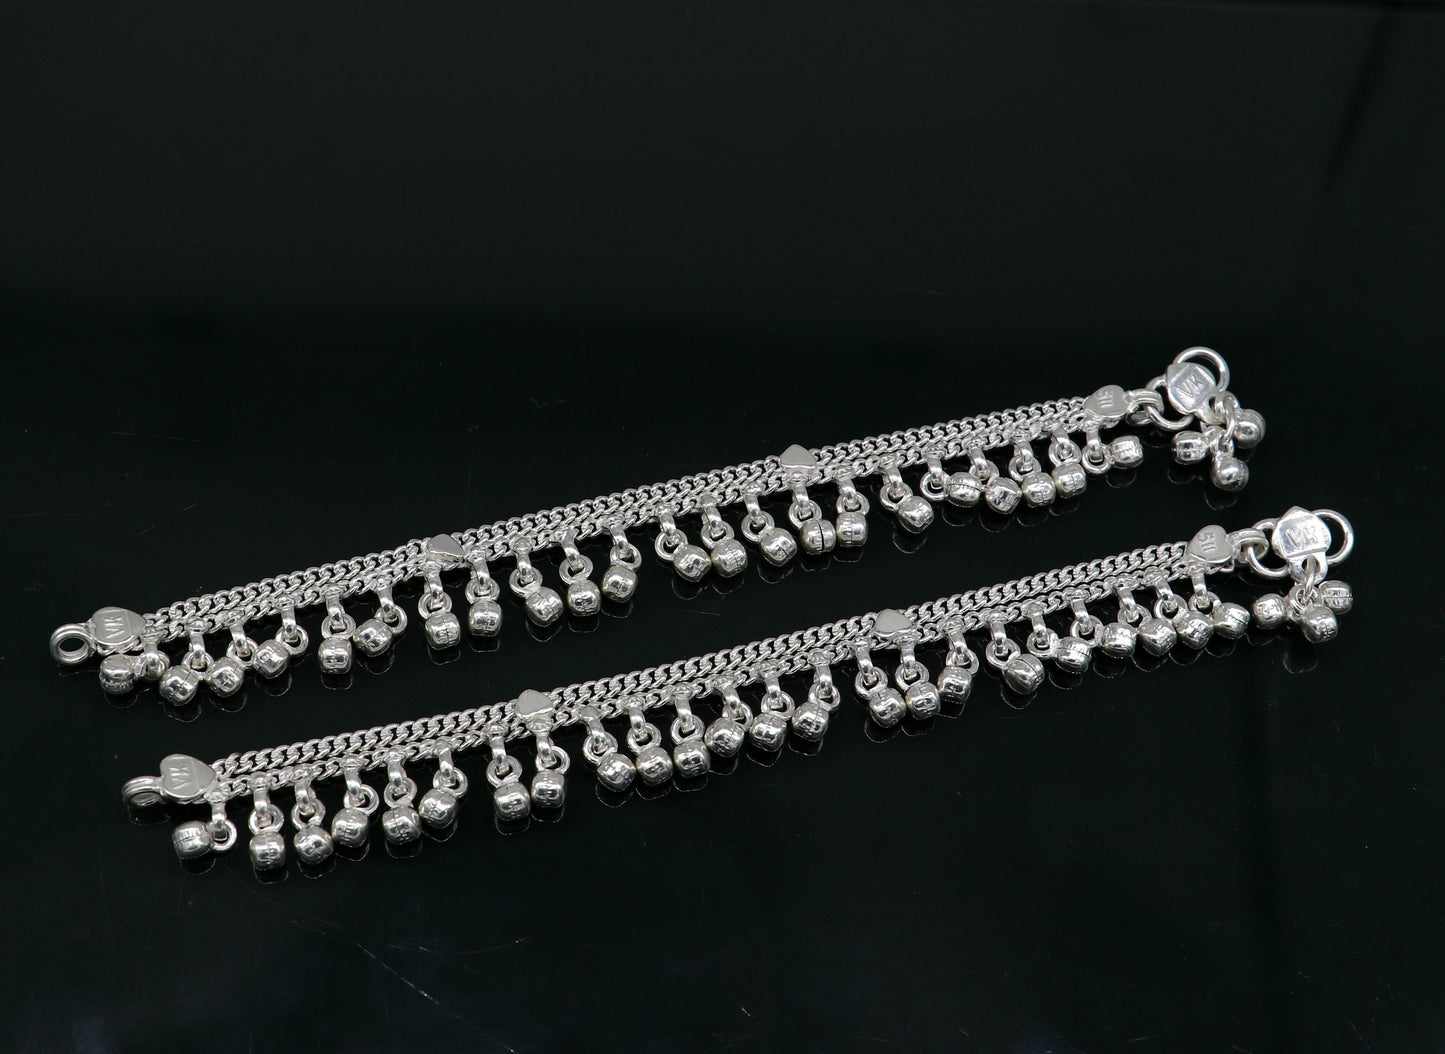 5.5" Pure sterling silver handmade jingling anklets baby ankle bracelet, best gifting noisy anklets kids jewelry from India ank312 - TRIBAL ORNAMENTS